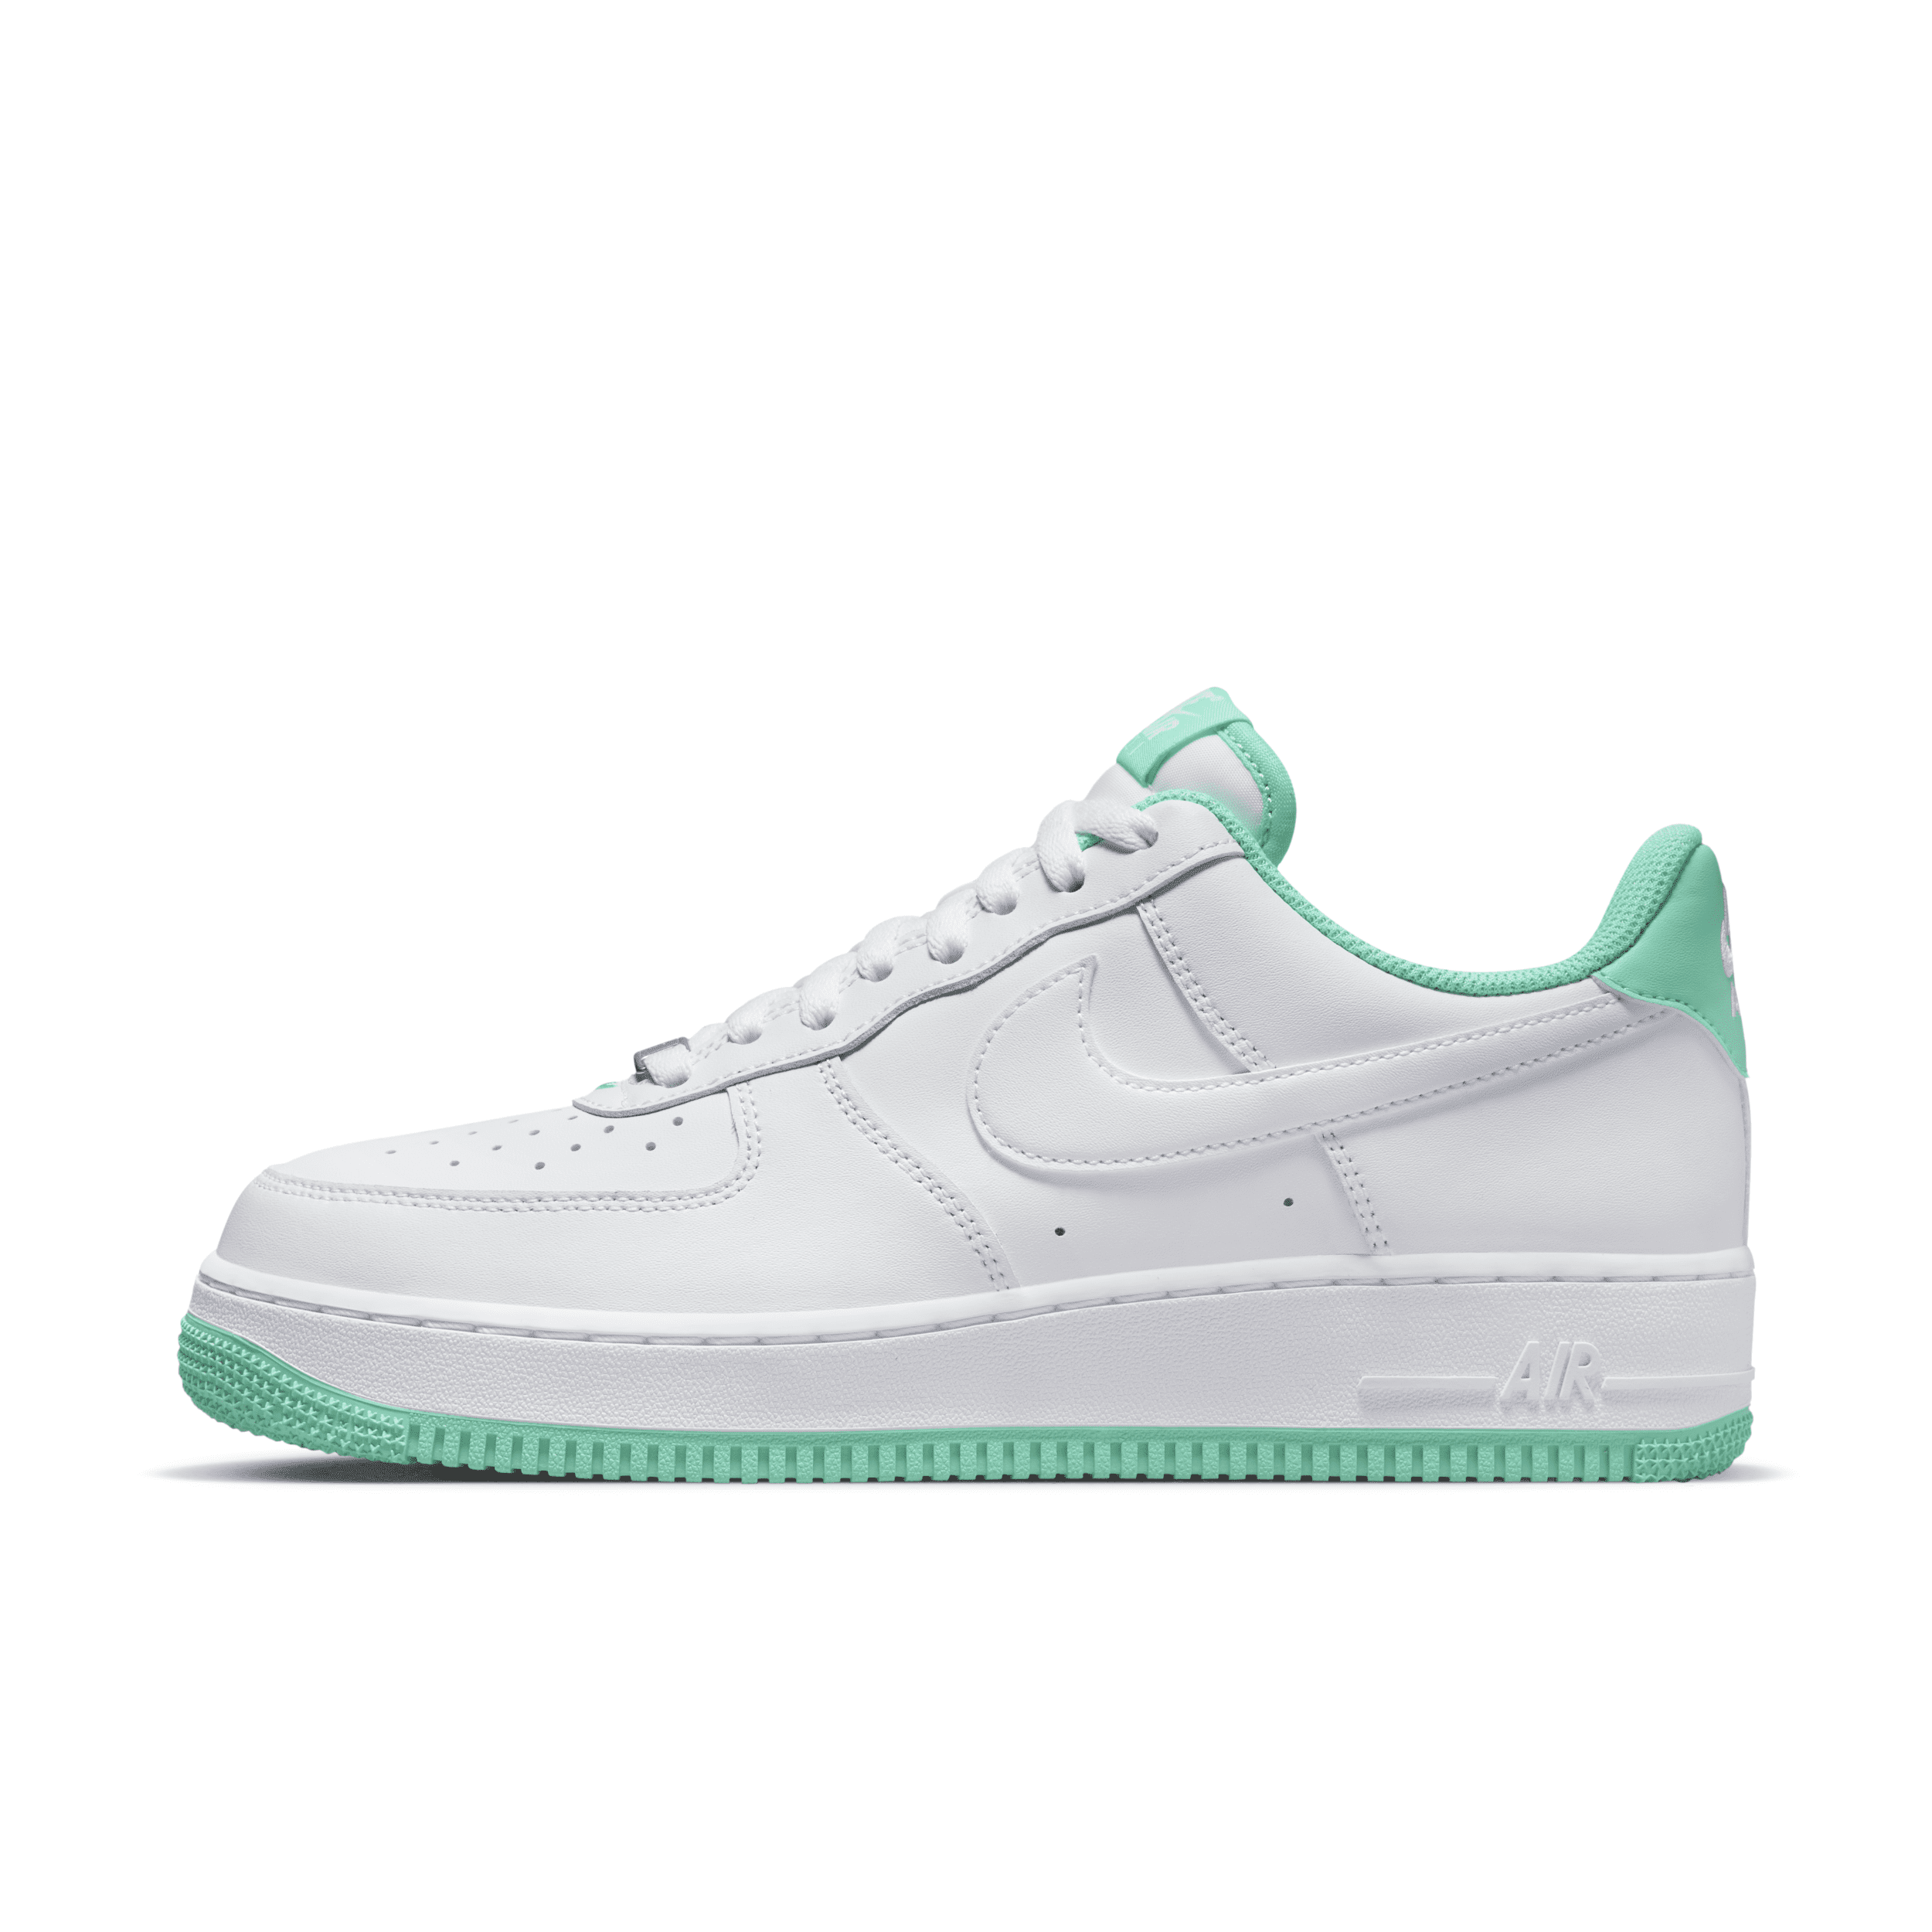 NIKE MEN'S AIR FORCE 1 '07 SHOES,14244101